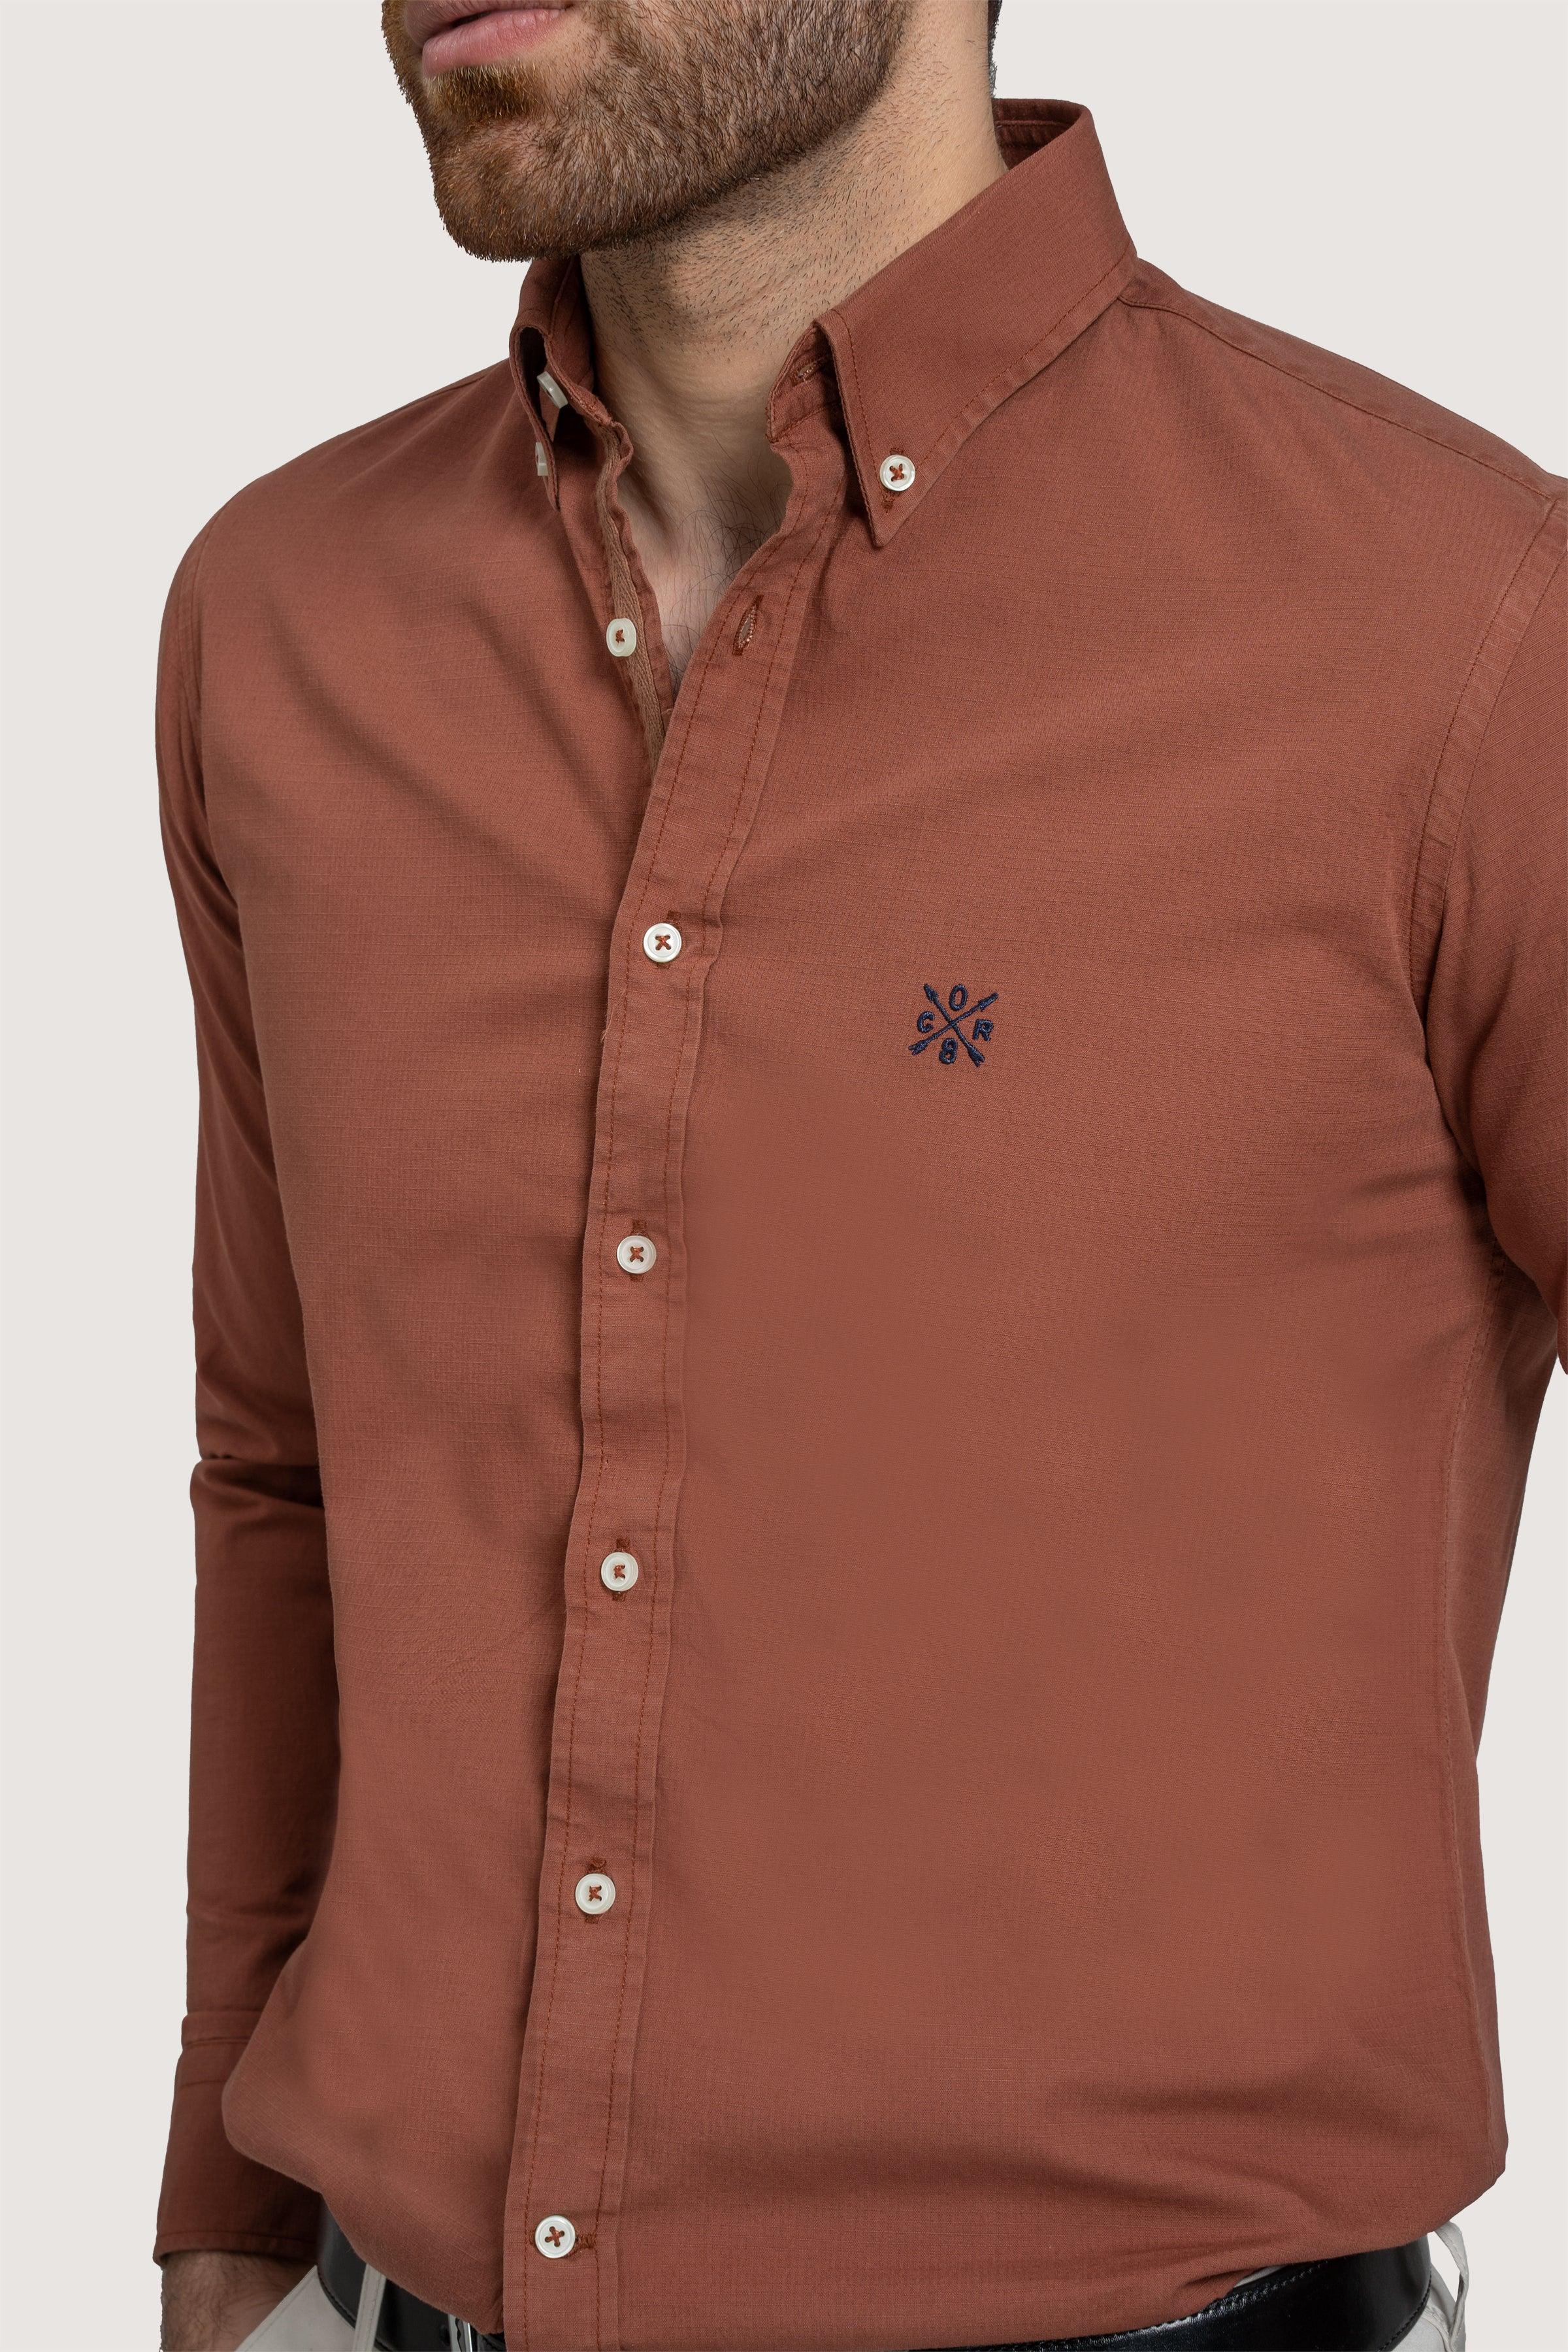 SEMI CASUAL GARMENT DYED SHIRT RUST at Charcoal Clothing